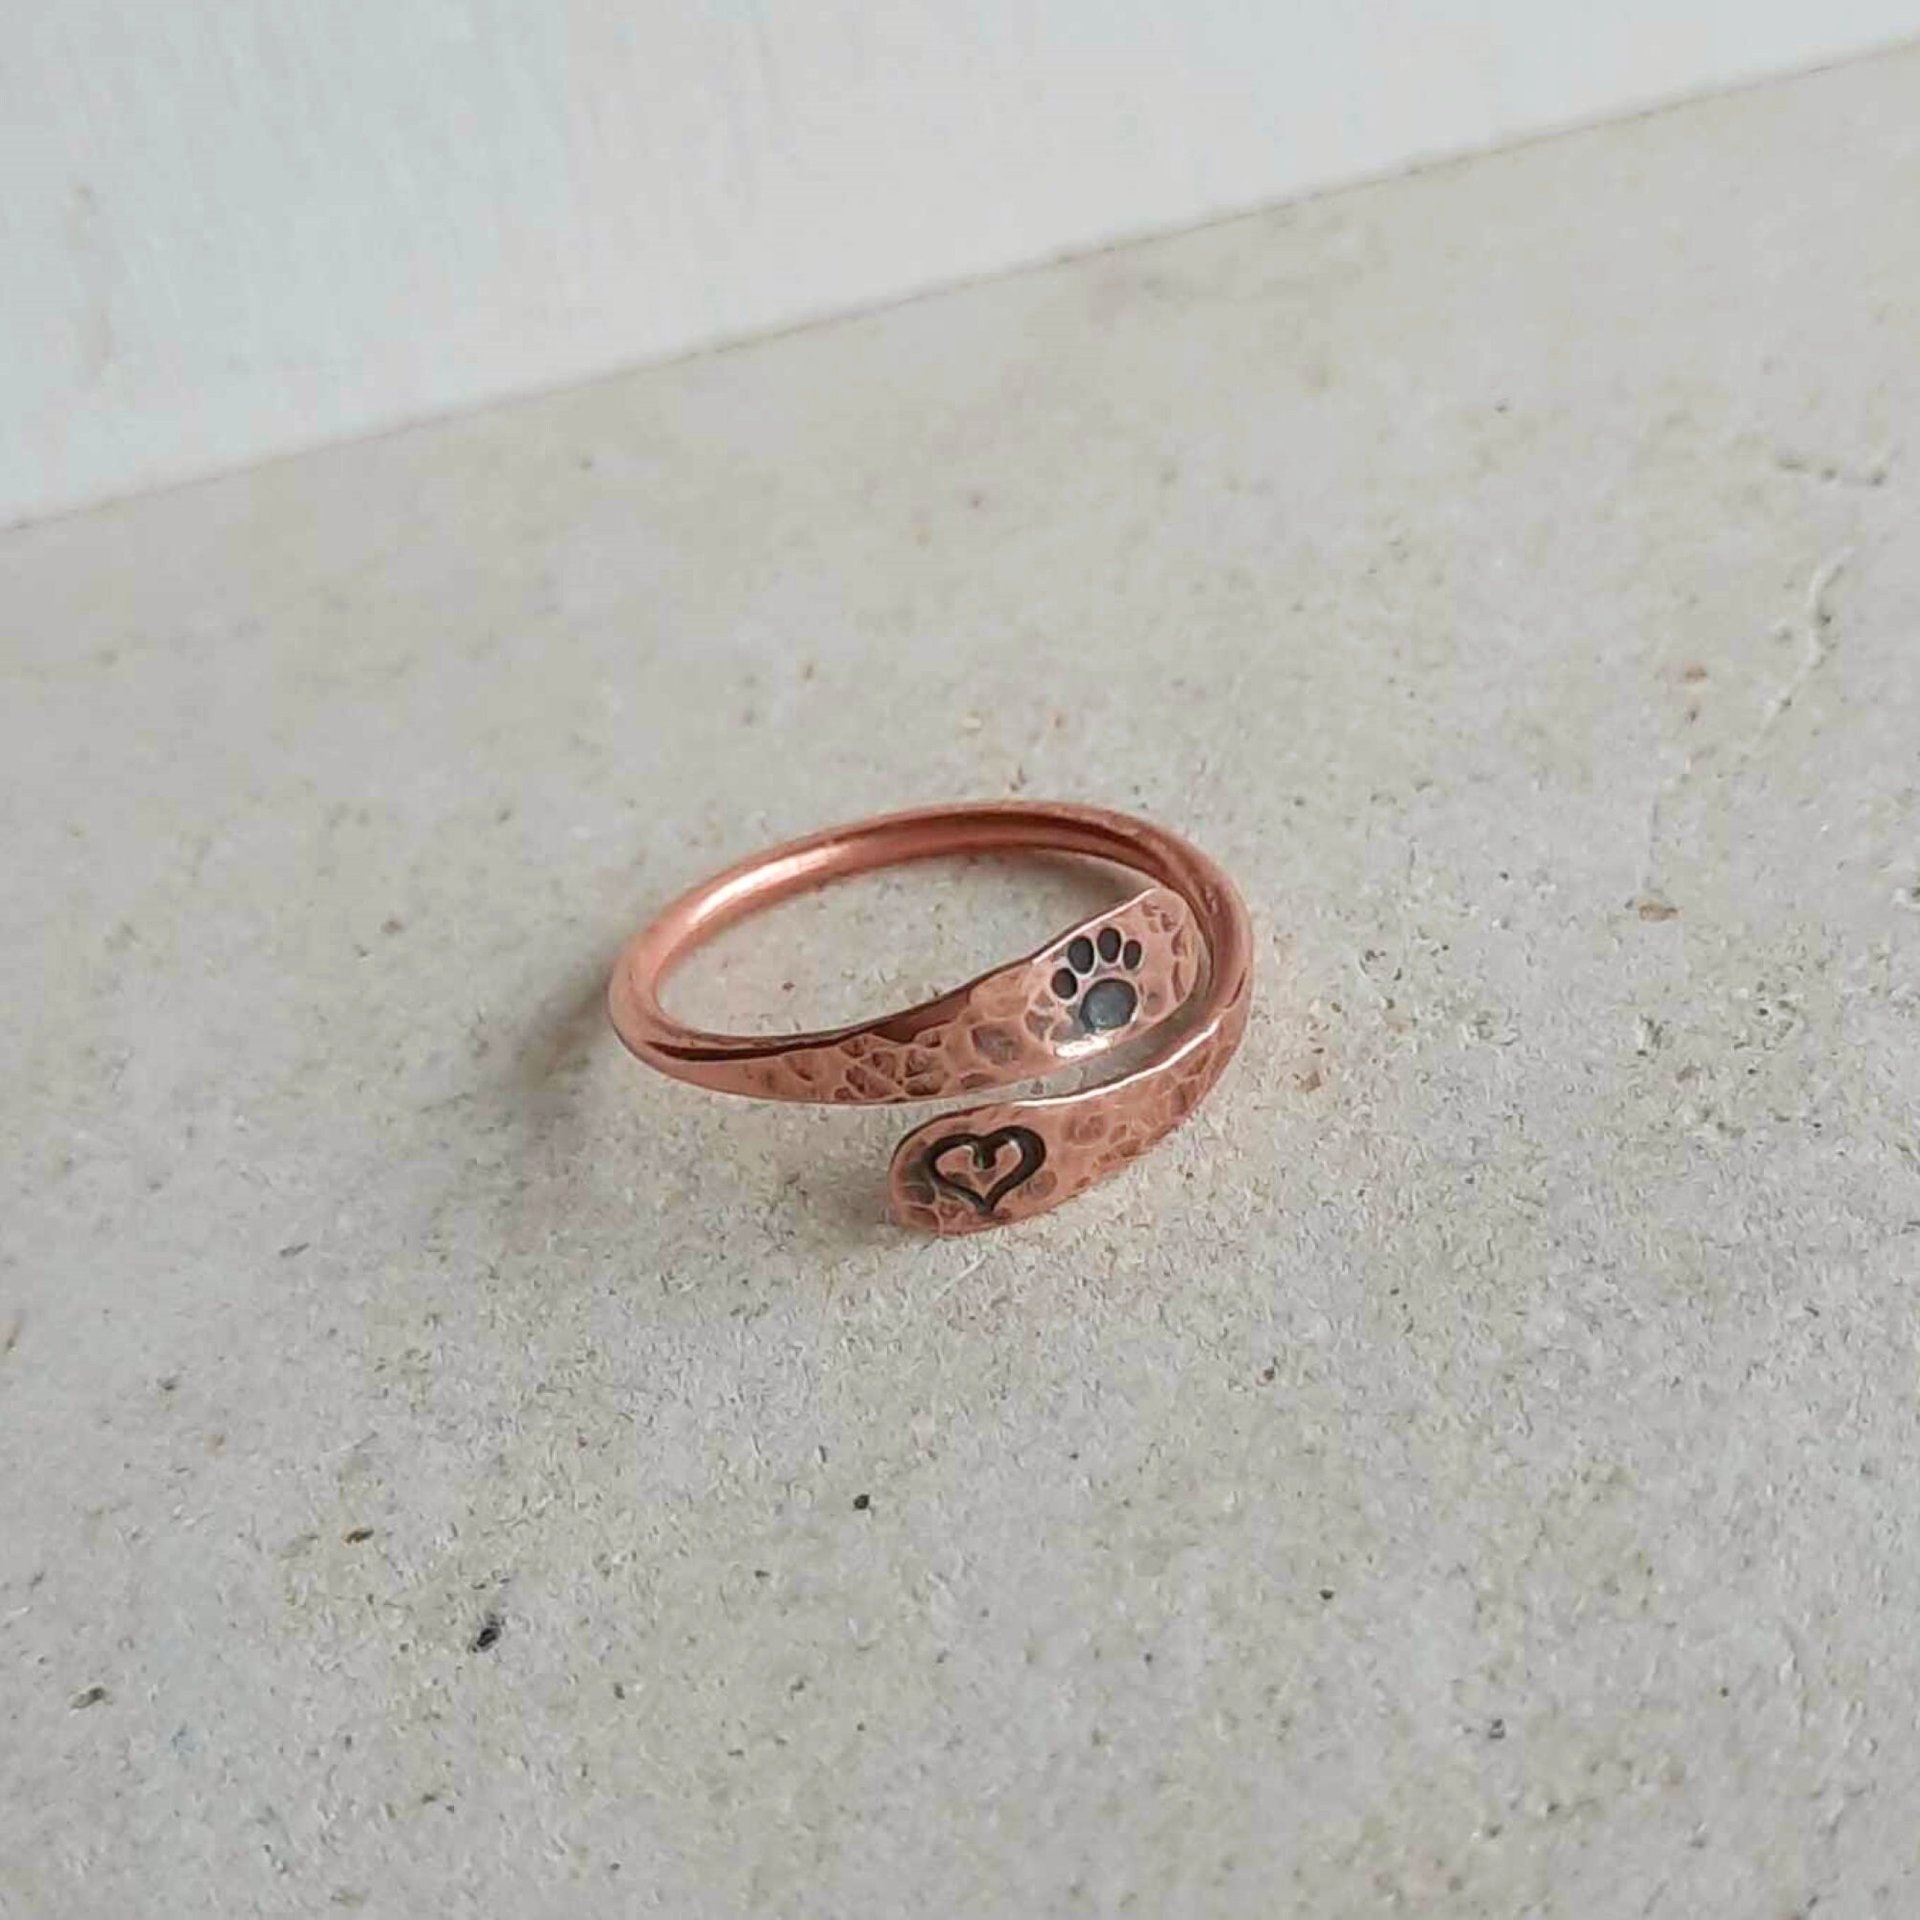 Handstamped copper paw print and love heart adjustable wraparound band ring, artisan made by The Tiny Tree Frog Jewellery